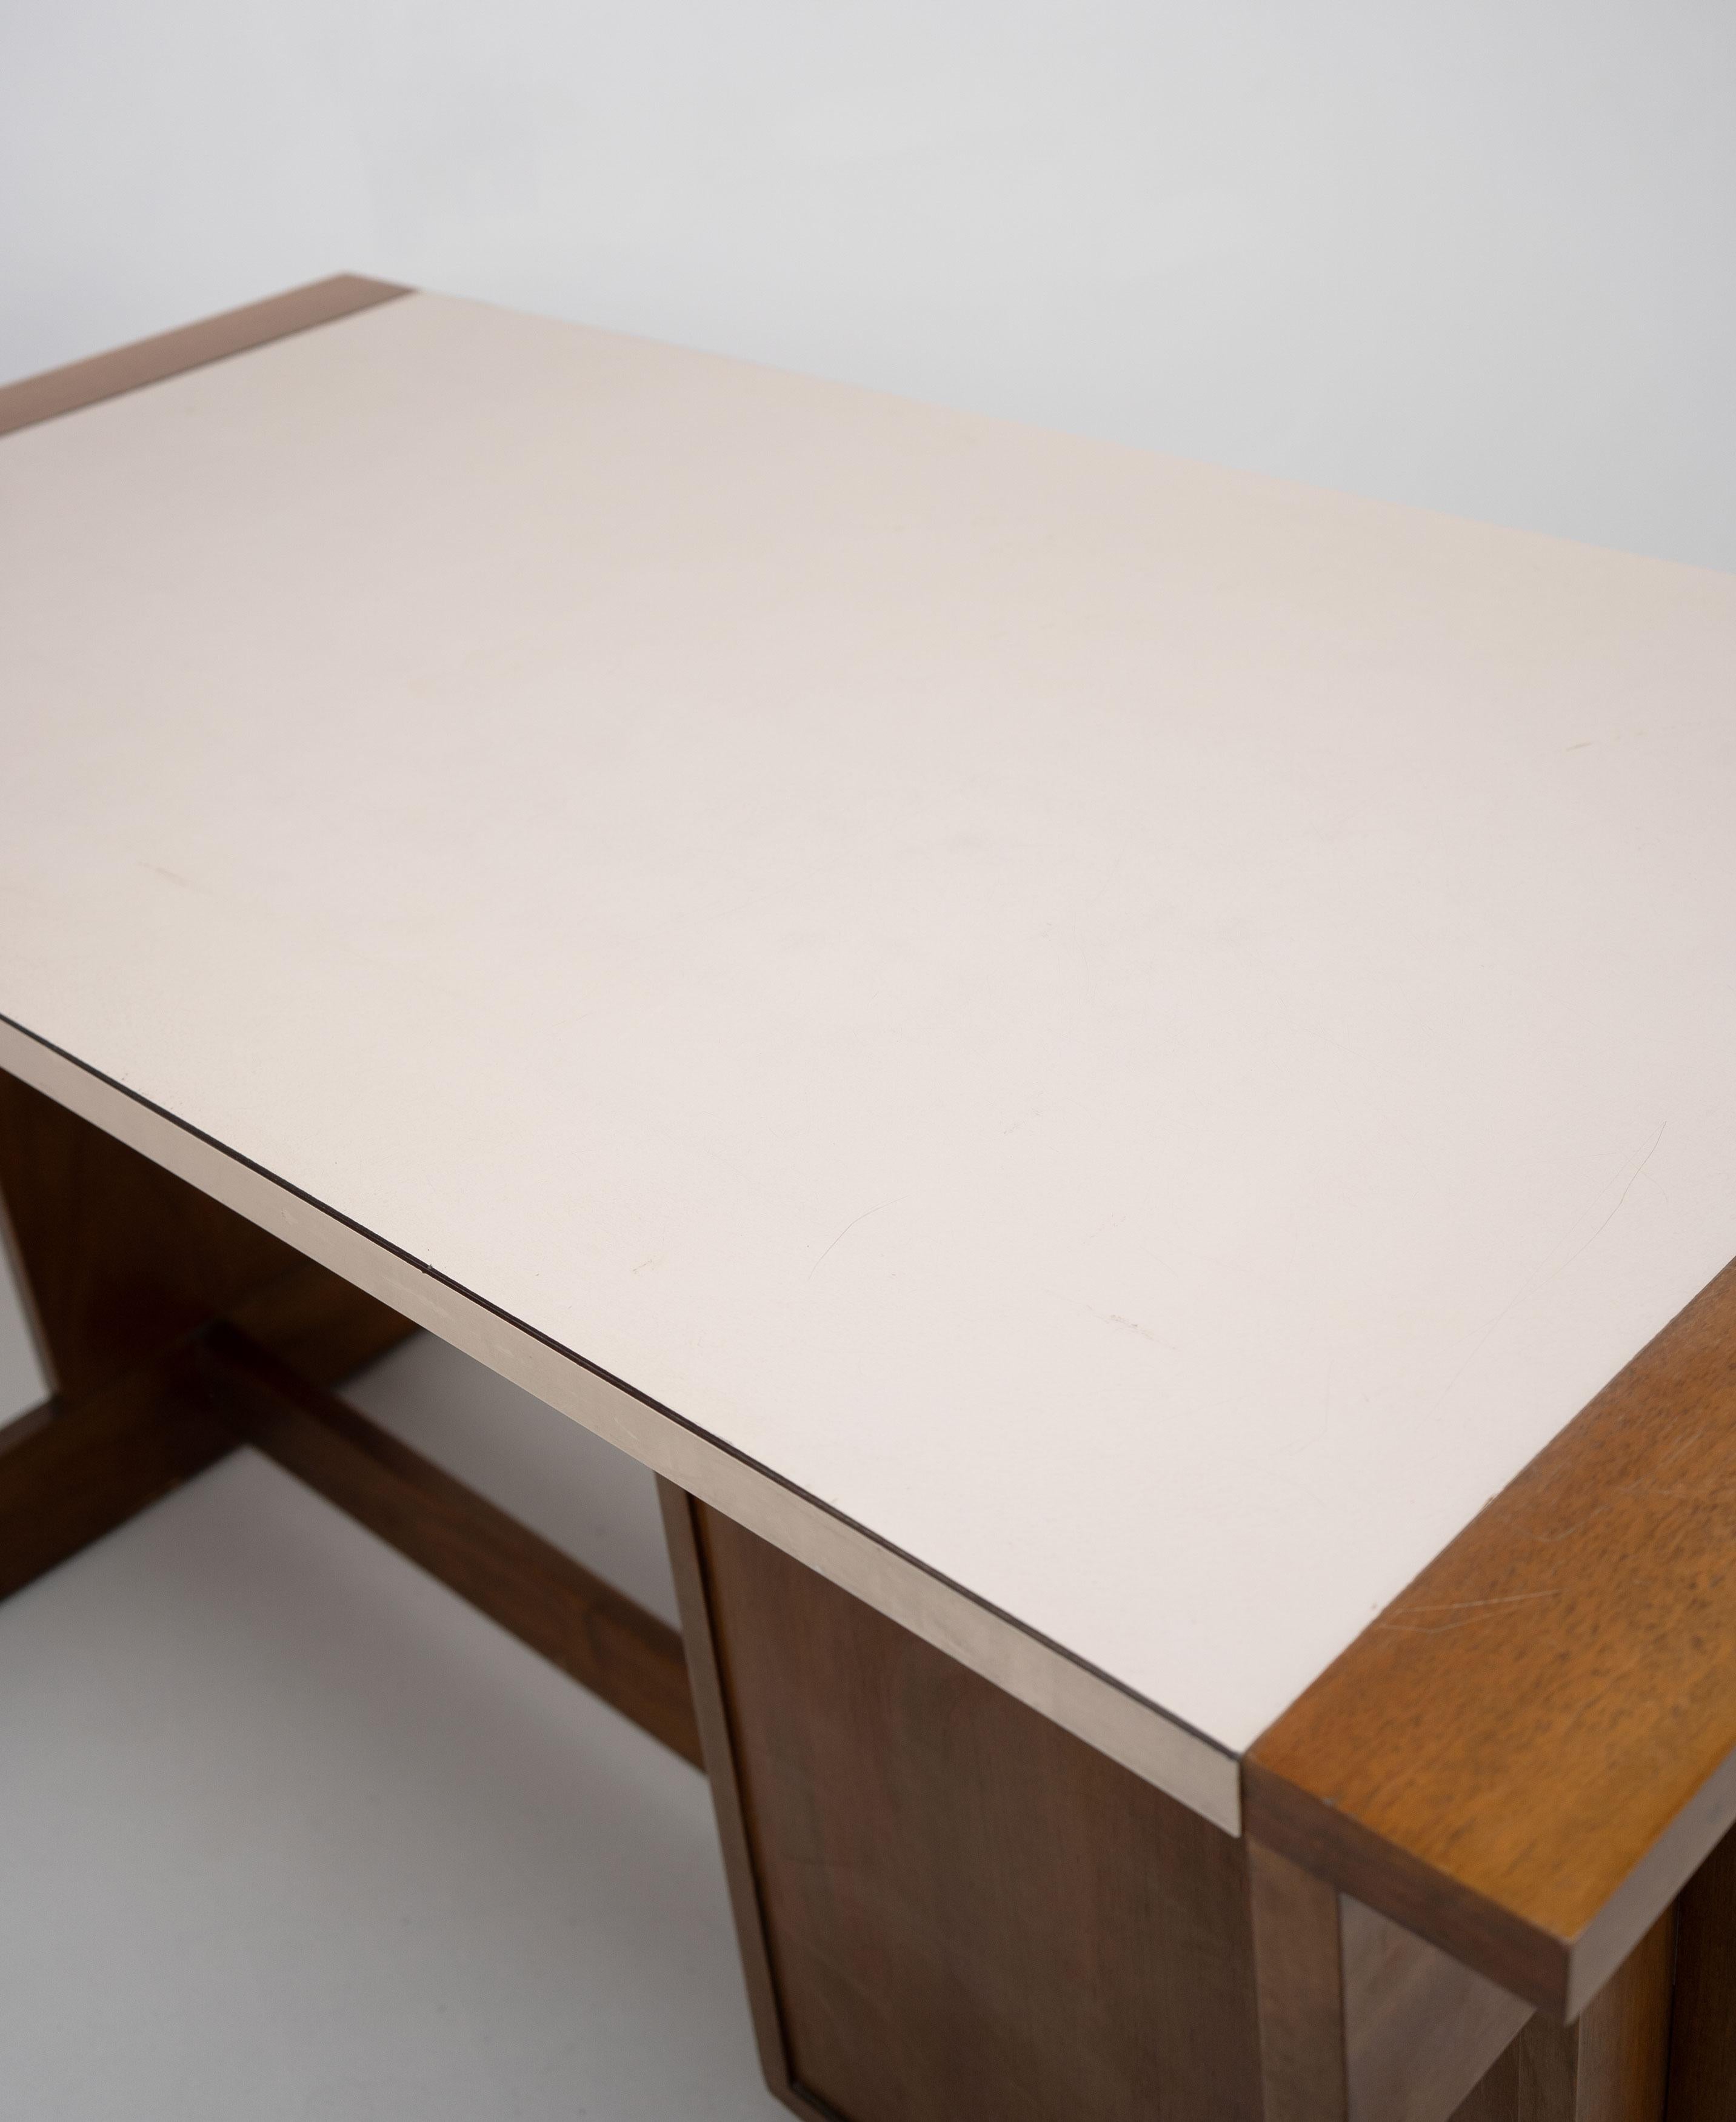 Constructivist Wood and Melamine Desk, Italy, c.1950 For Sale 1